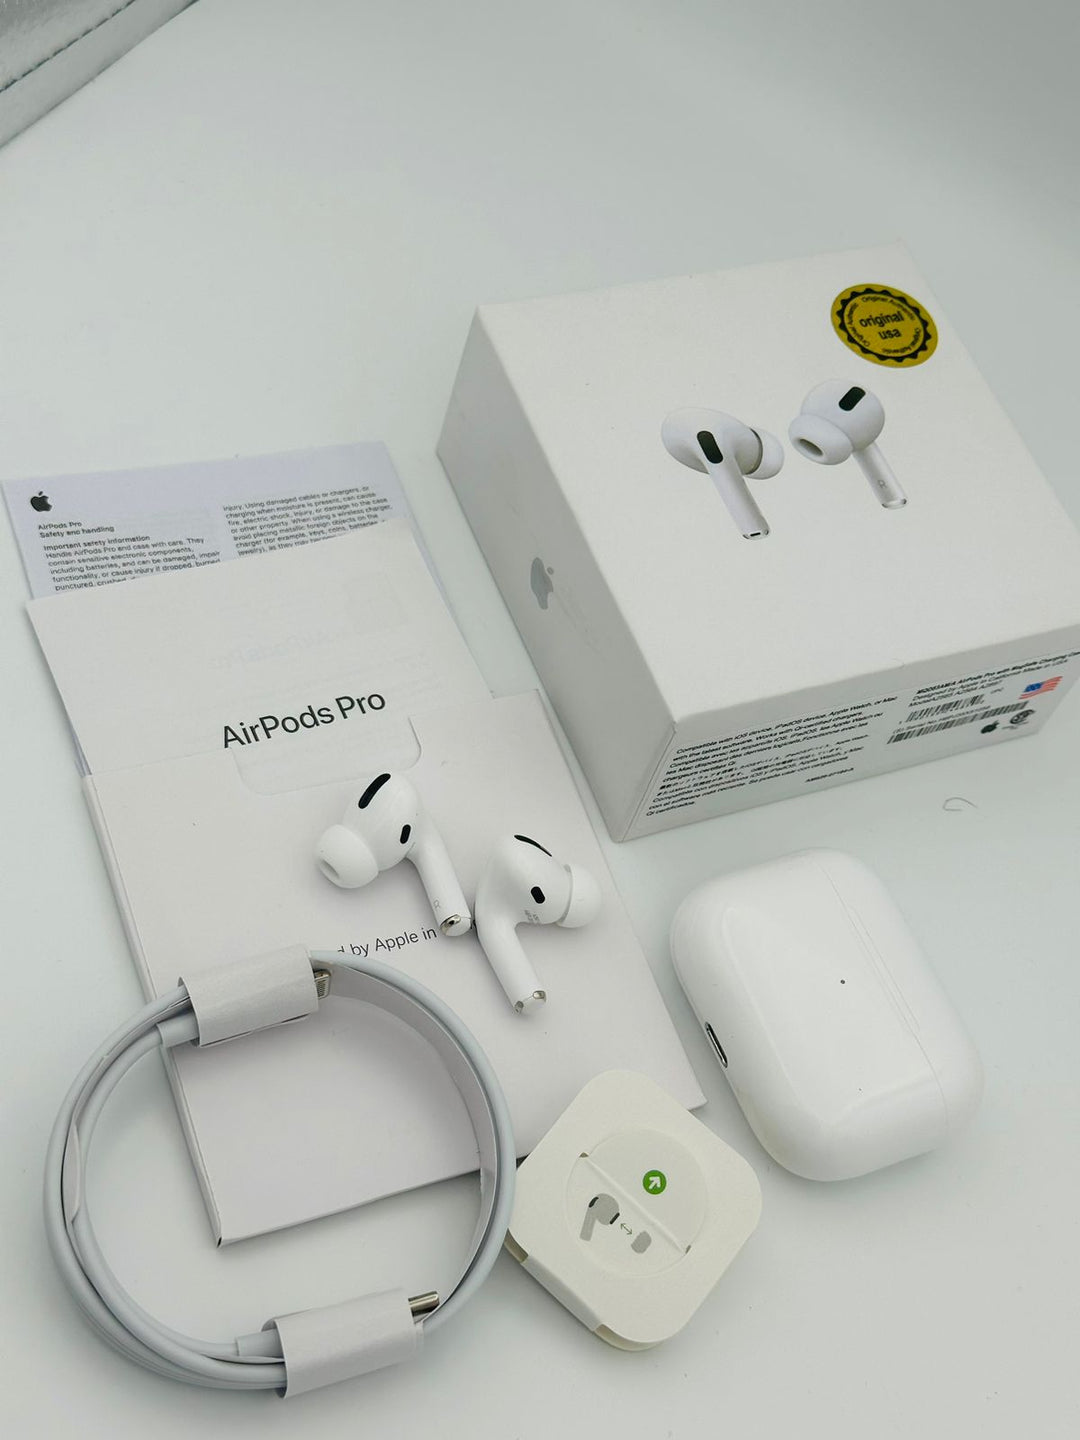 AIRPODS PRO MASTER COPY